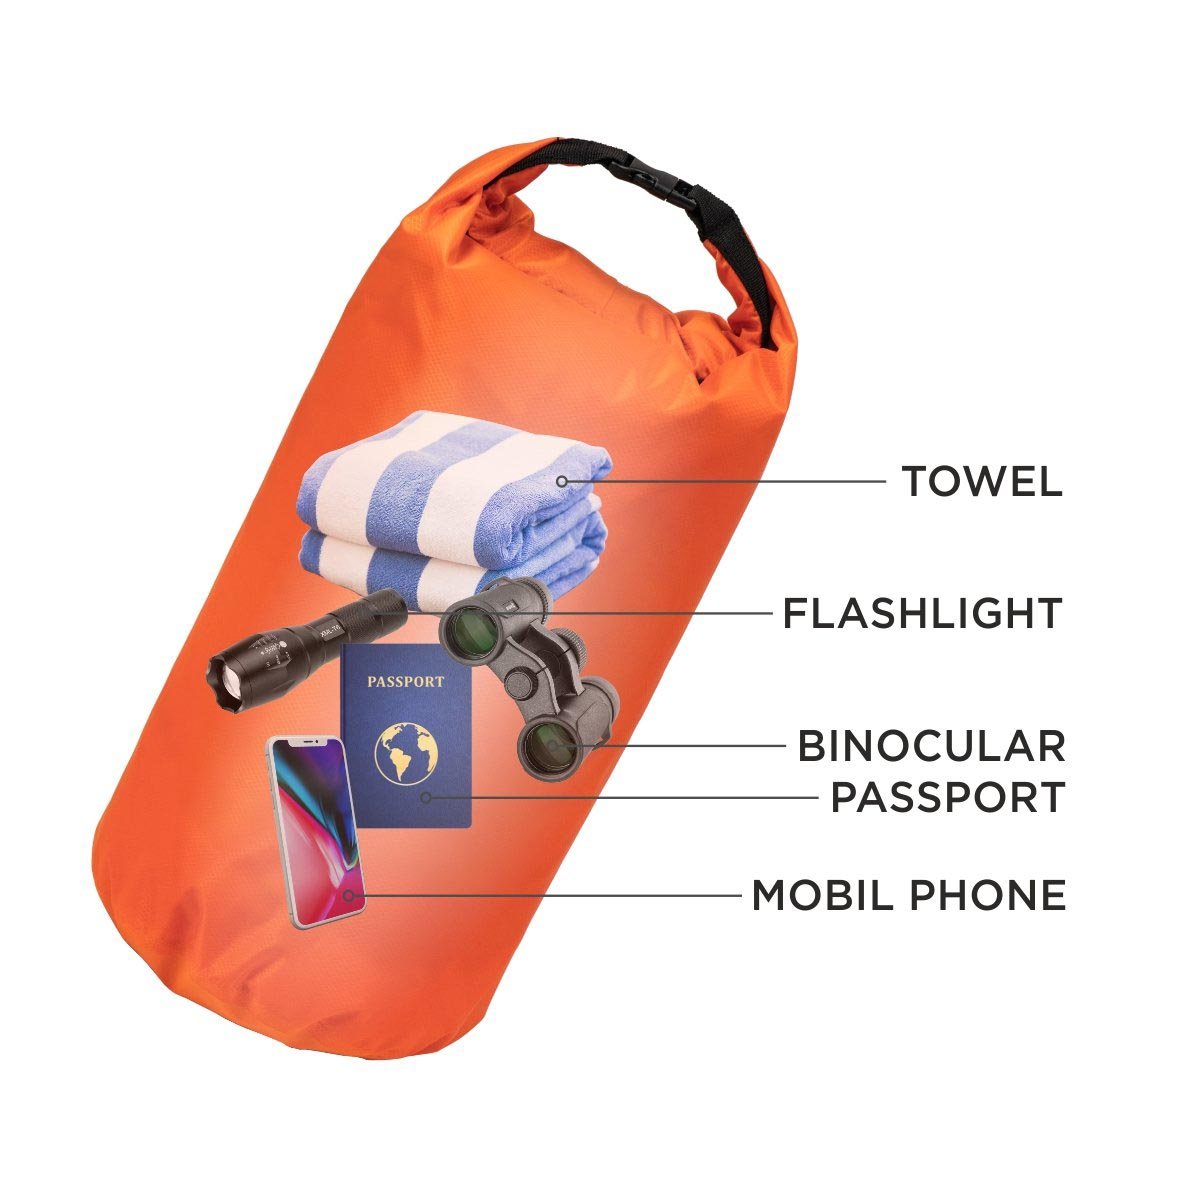 You could put your towel, binocular, flashlight, mobile phone and documents into the 10 L Orange Polyester Waterproof Dry Bag for Fishing, Kayaking, and be sure they stay safe